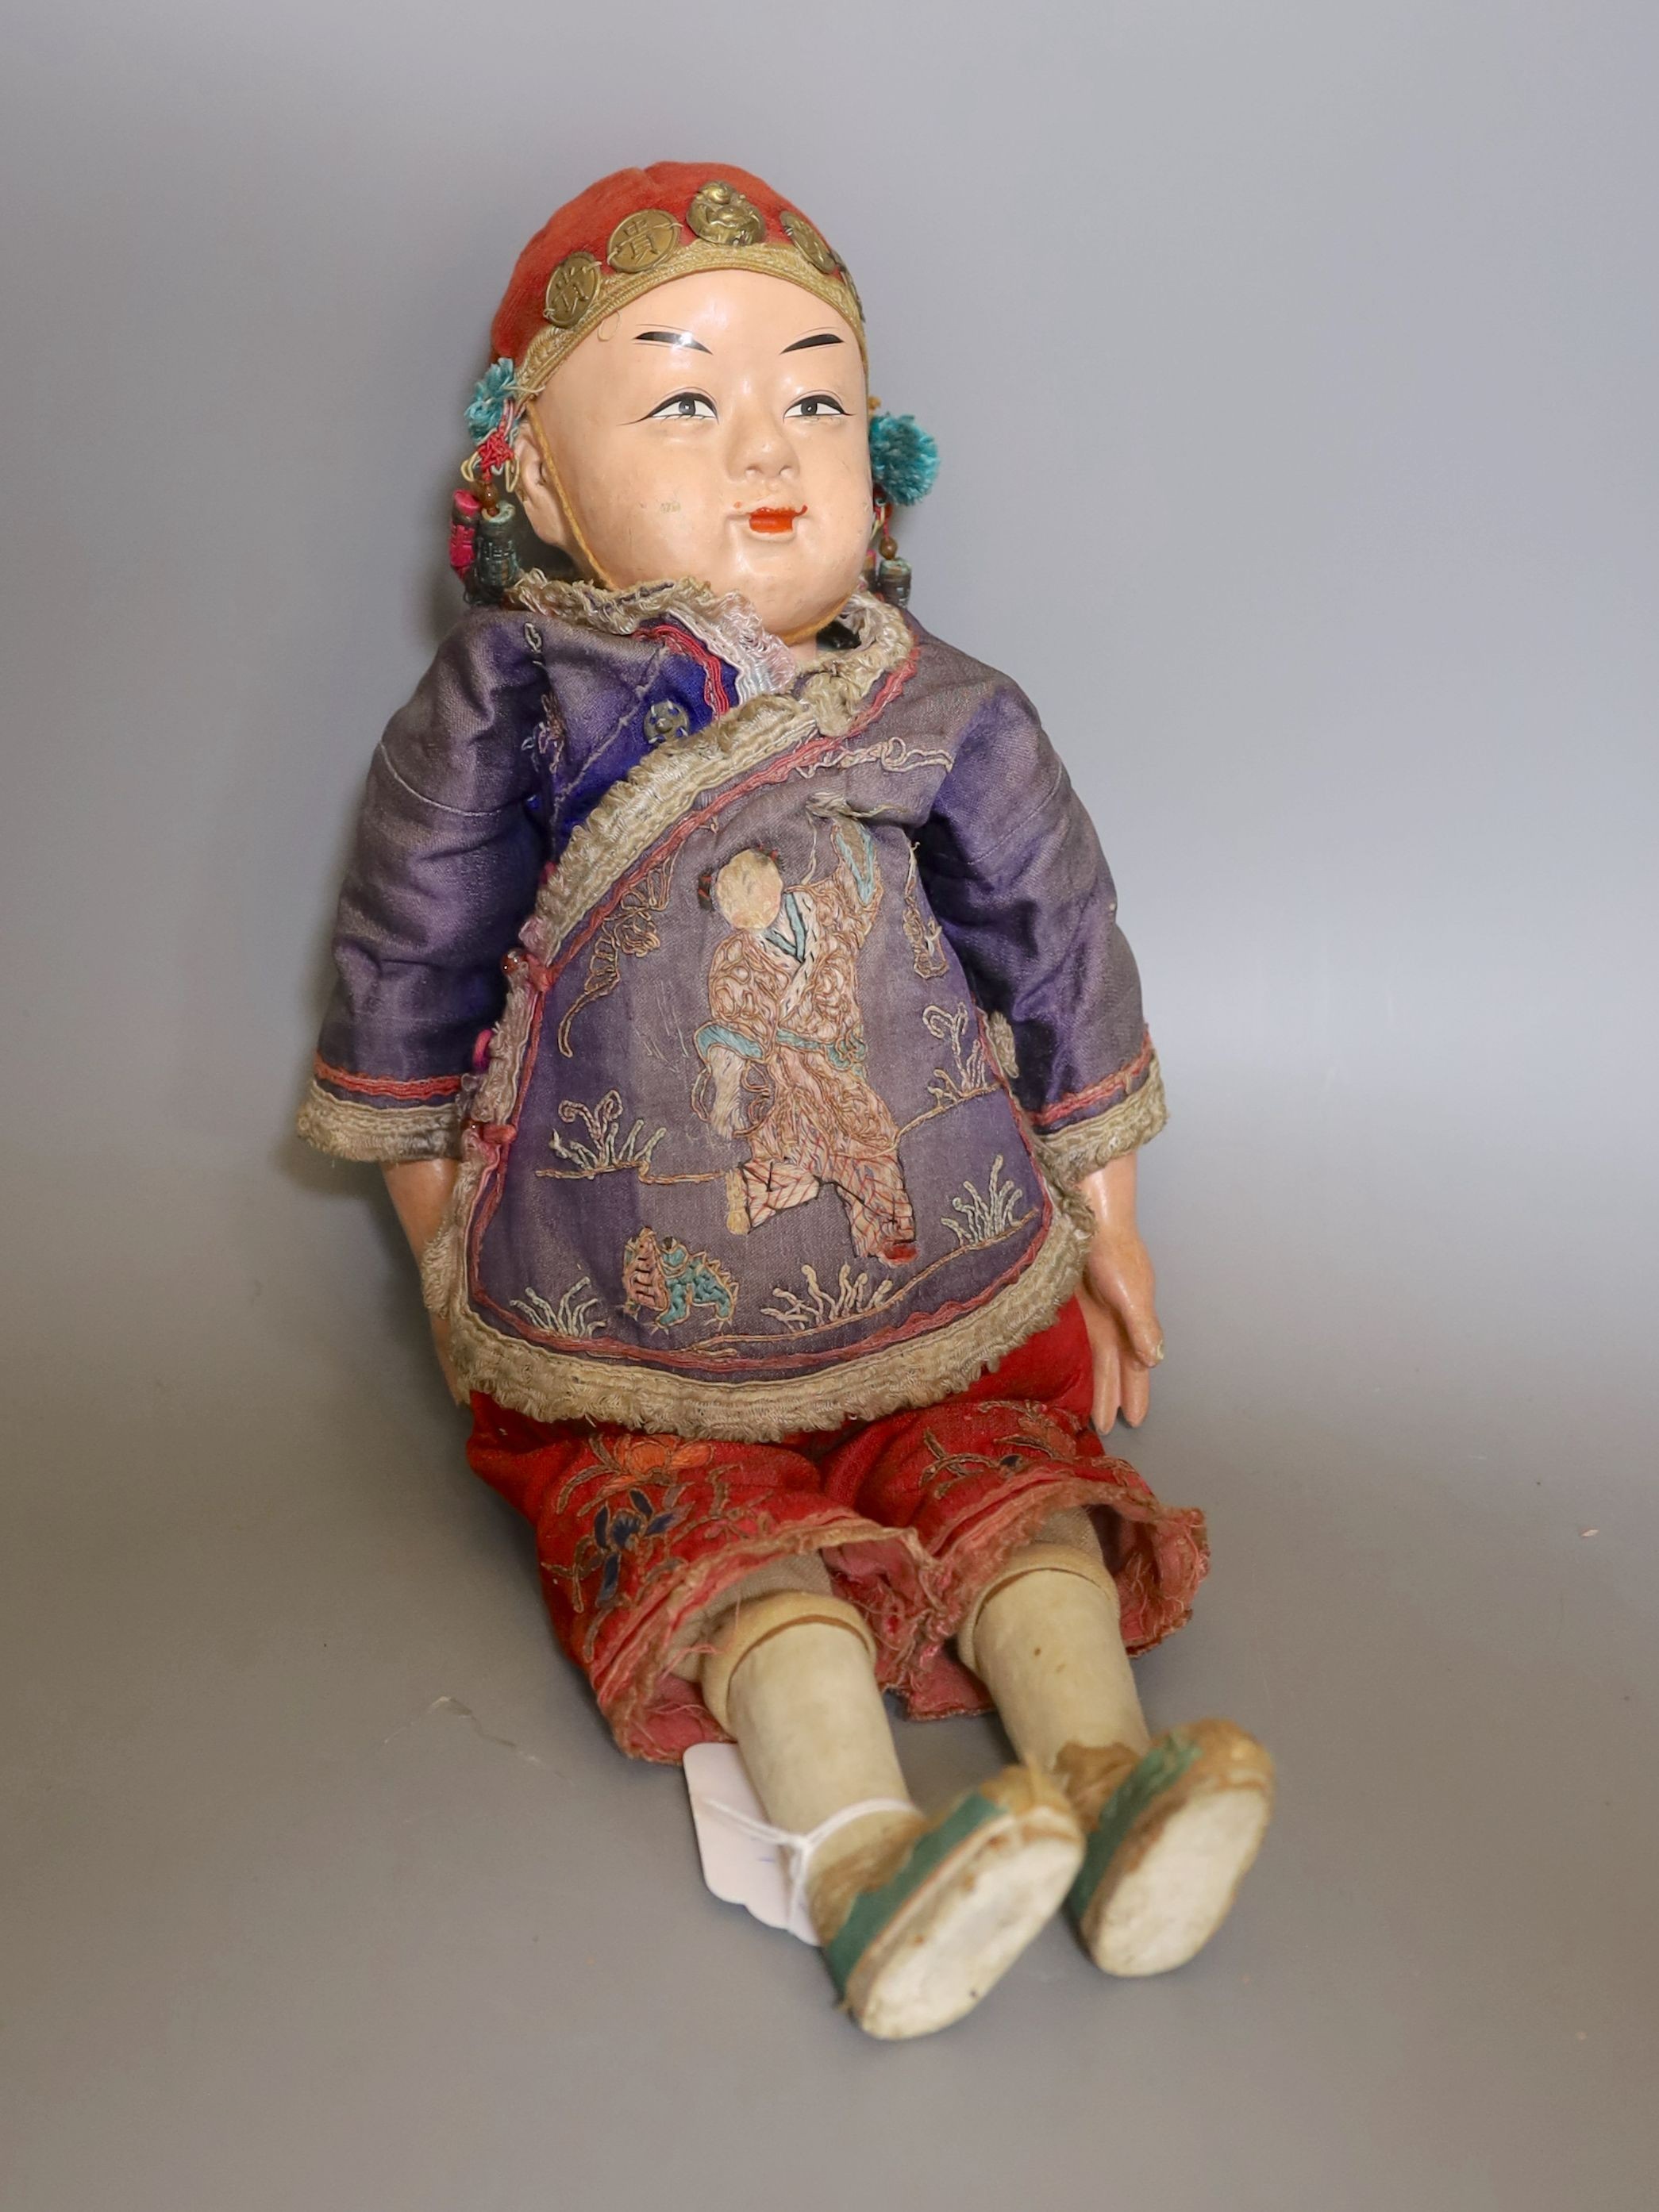 A papier mache doll, a Chinese boy in Chinese costume - 40cm high